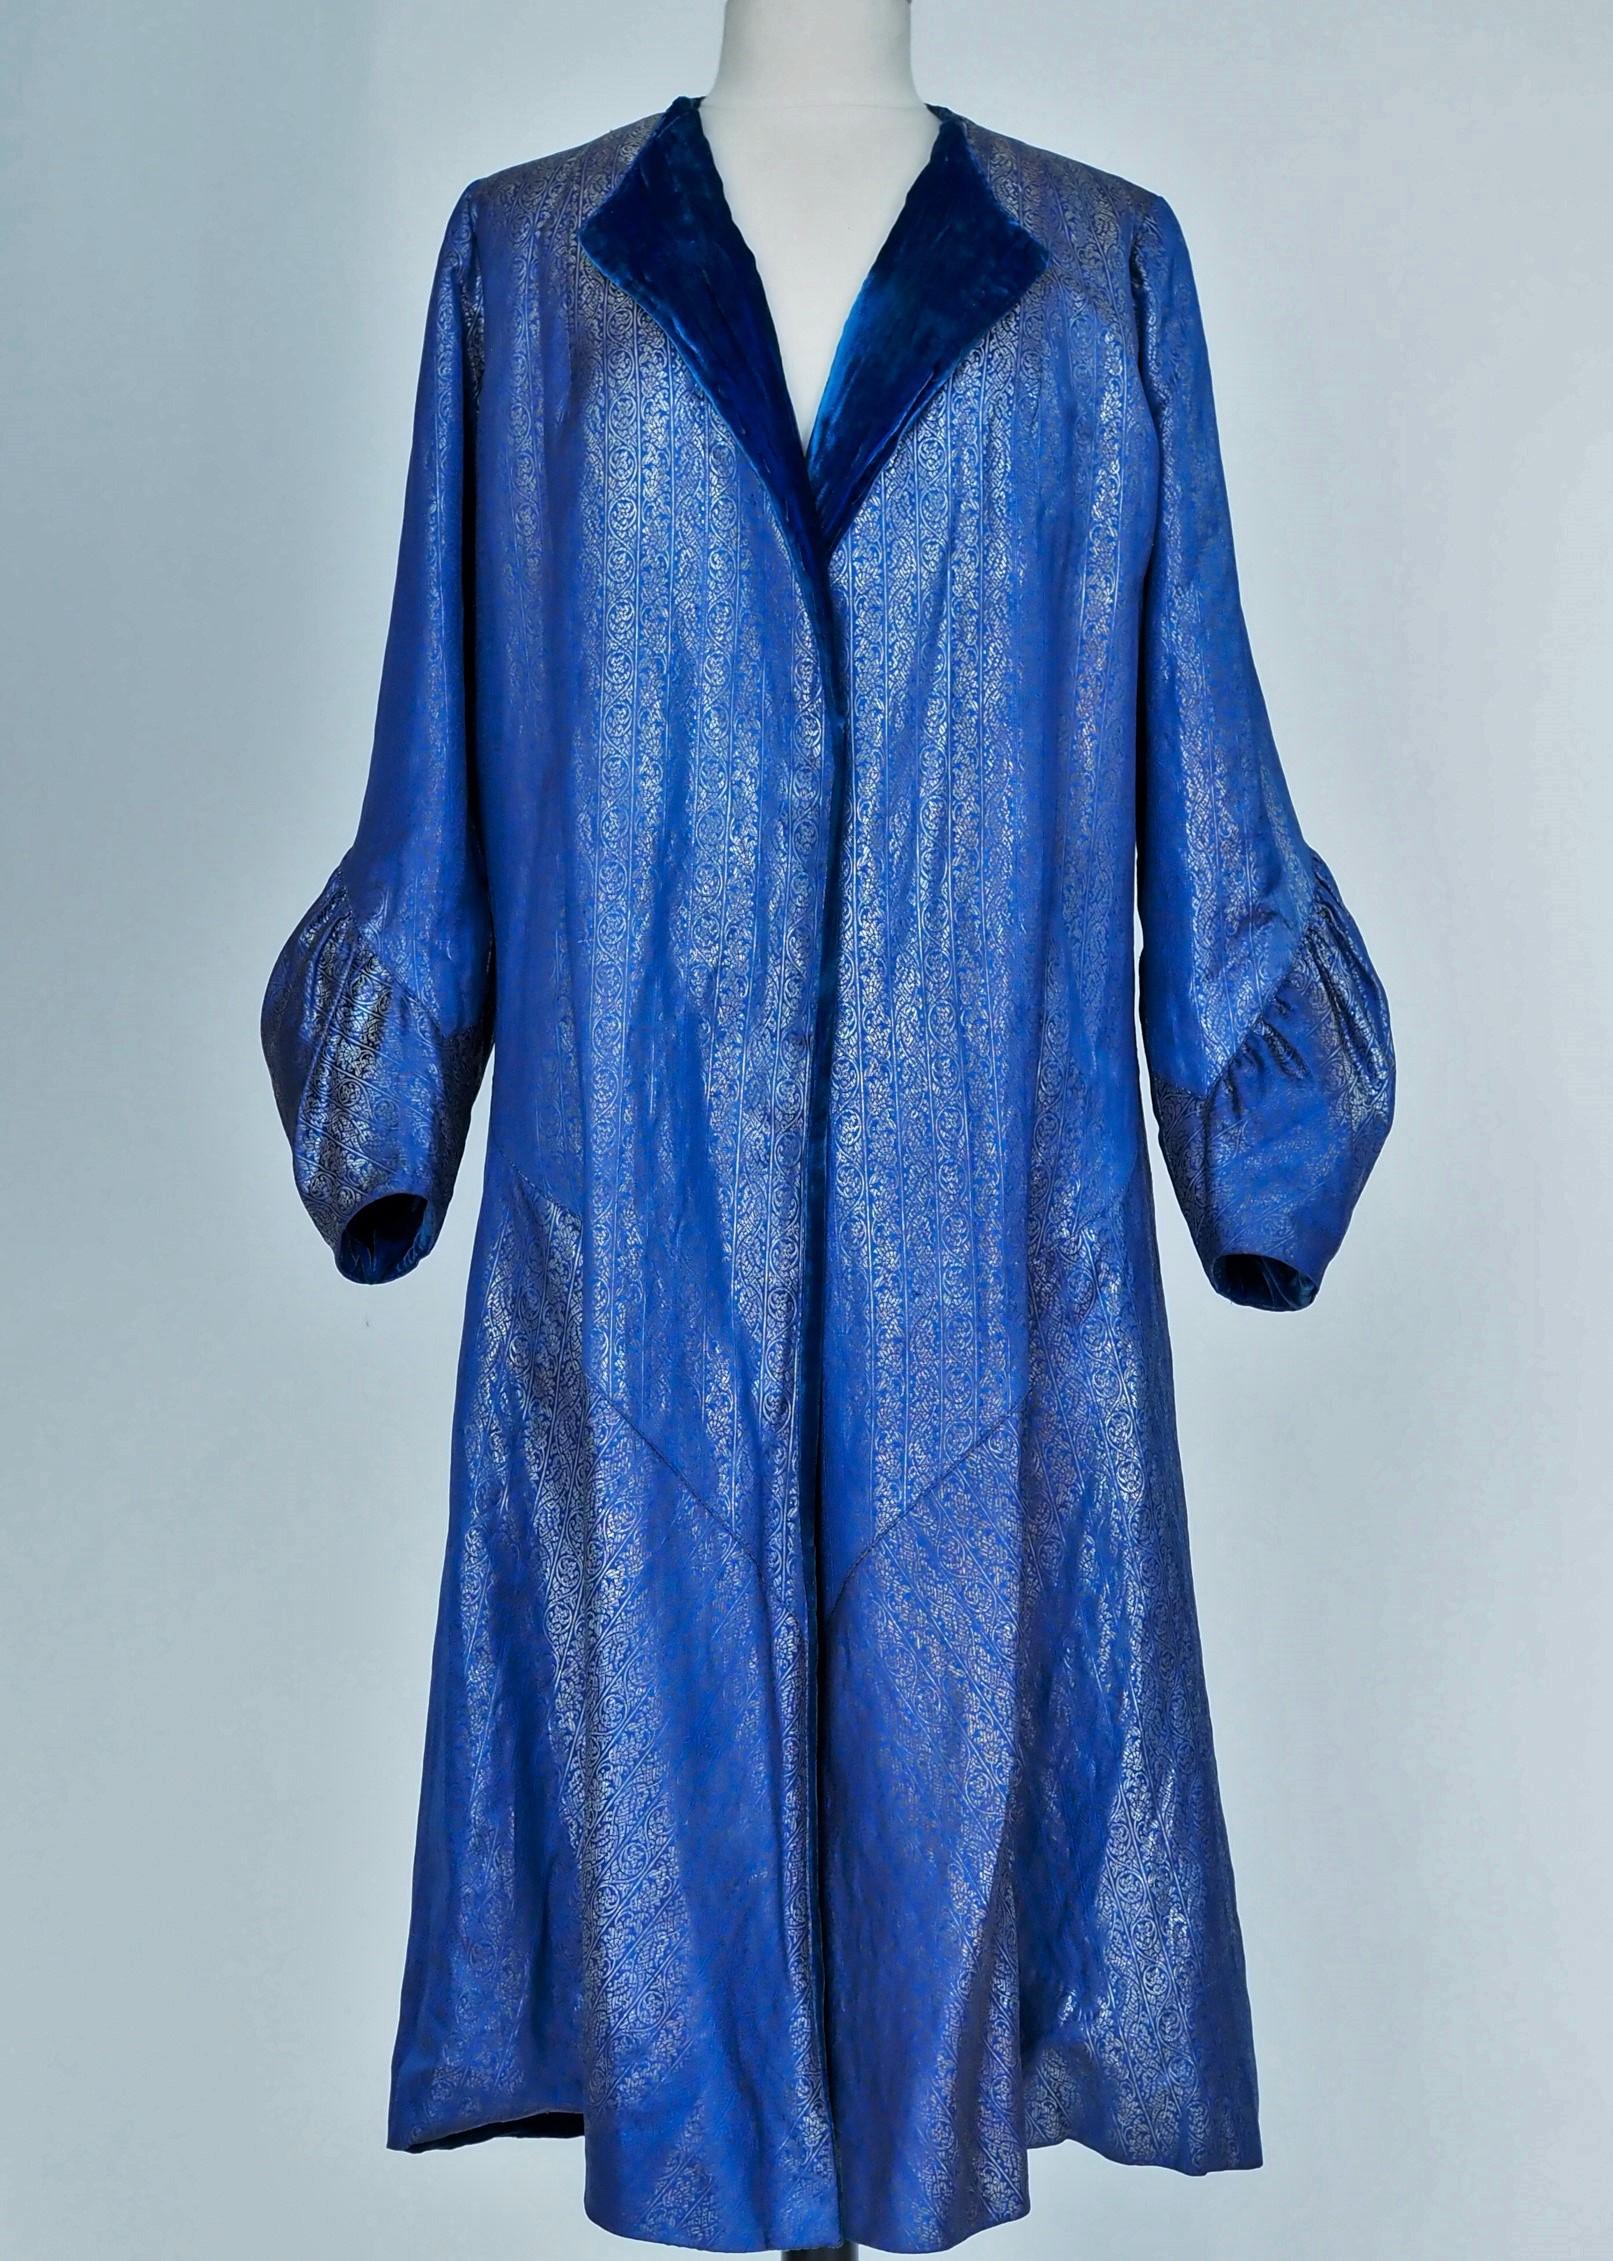 Evening Couture coat in silver lamé by Germaine Lecomte N°03871 Paris Circa 1930 For Sale 11